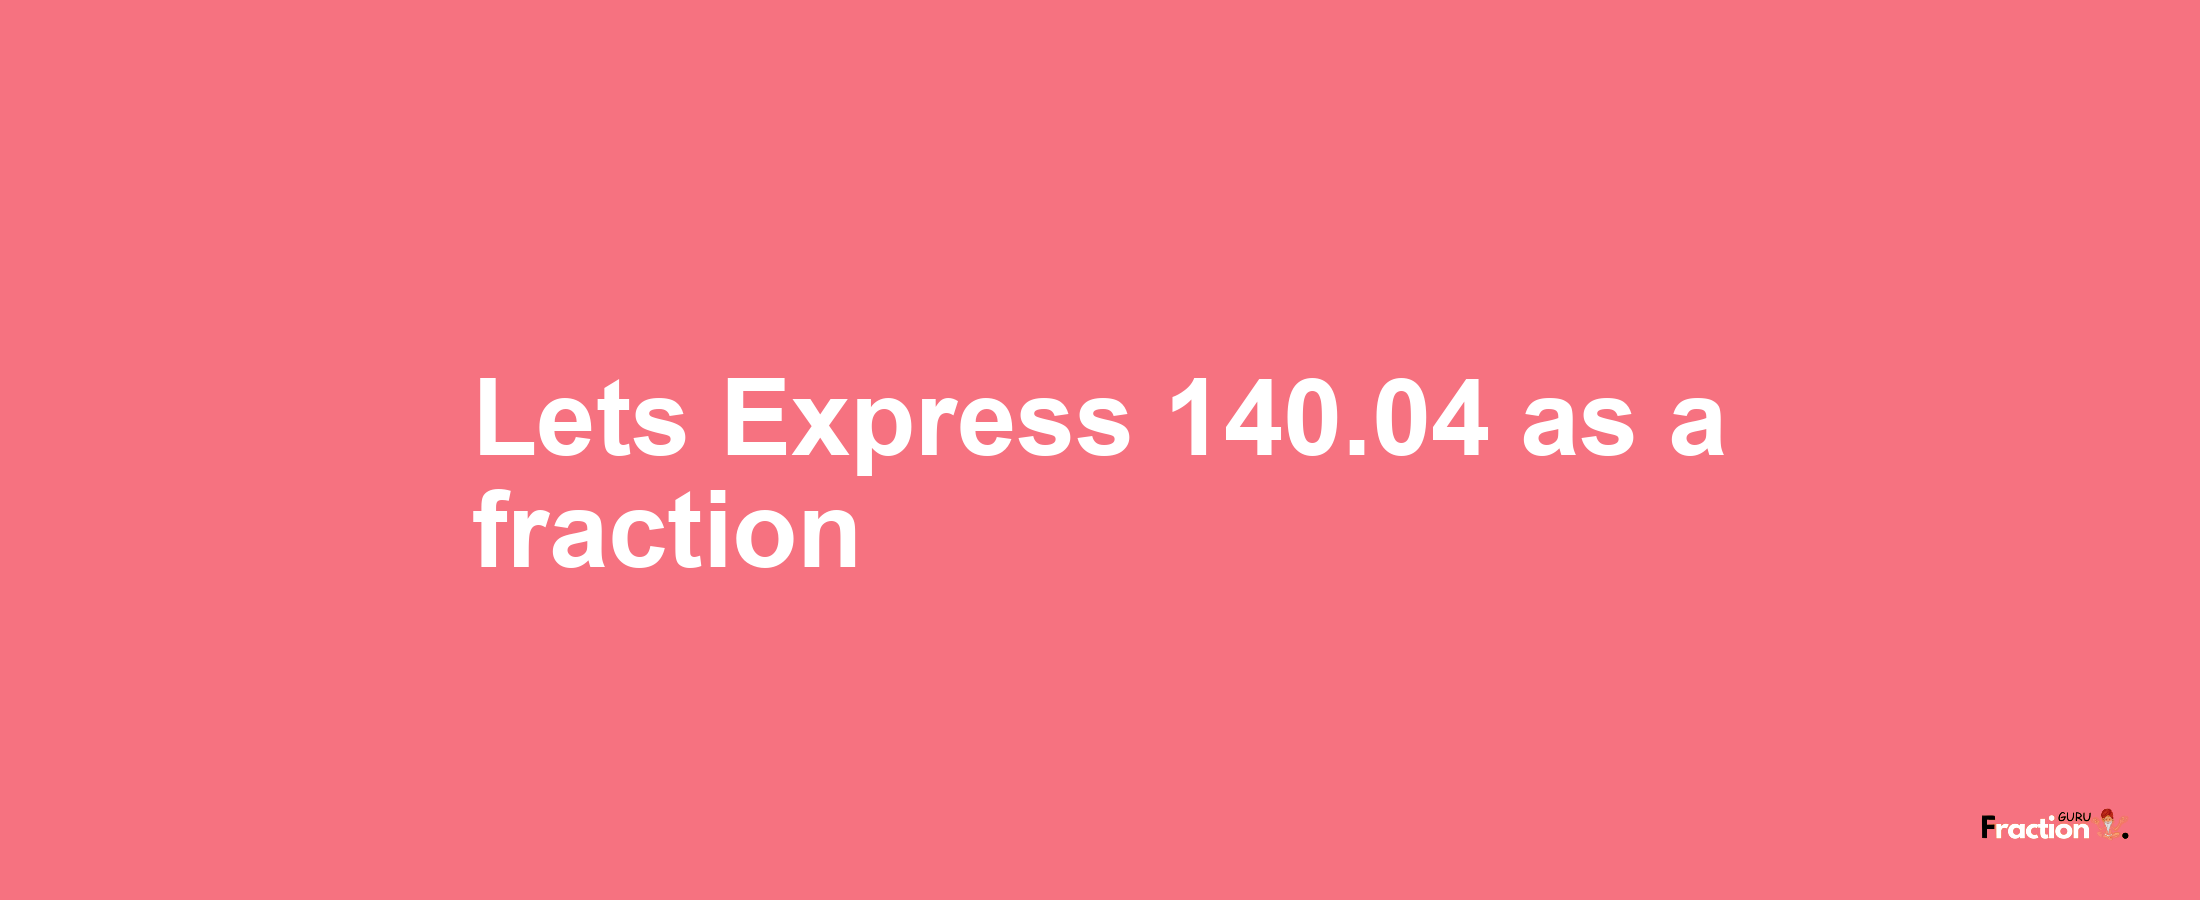 Lets Express 140.04 as afraction